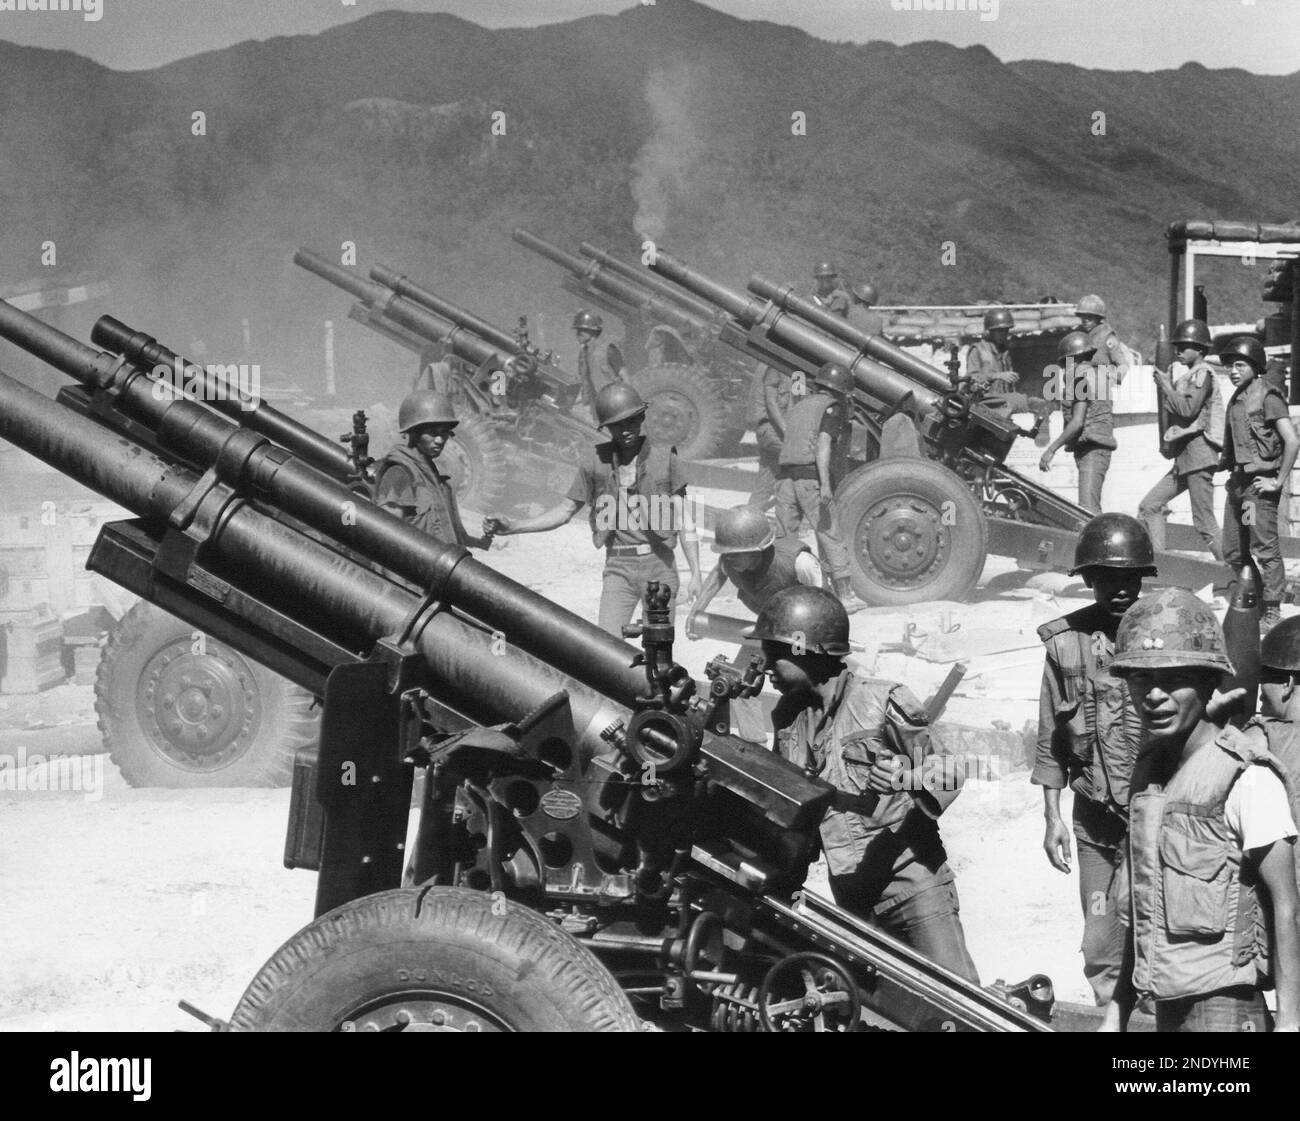 Five 105mm howitzers atop a flattened mountaintop in Vietnam called Firebase O'Reilly are fired in response to North Vietnamese mortar and recoilless rifle on August 18, 1970. (AP Photo/Mark Godfrey